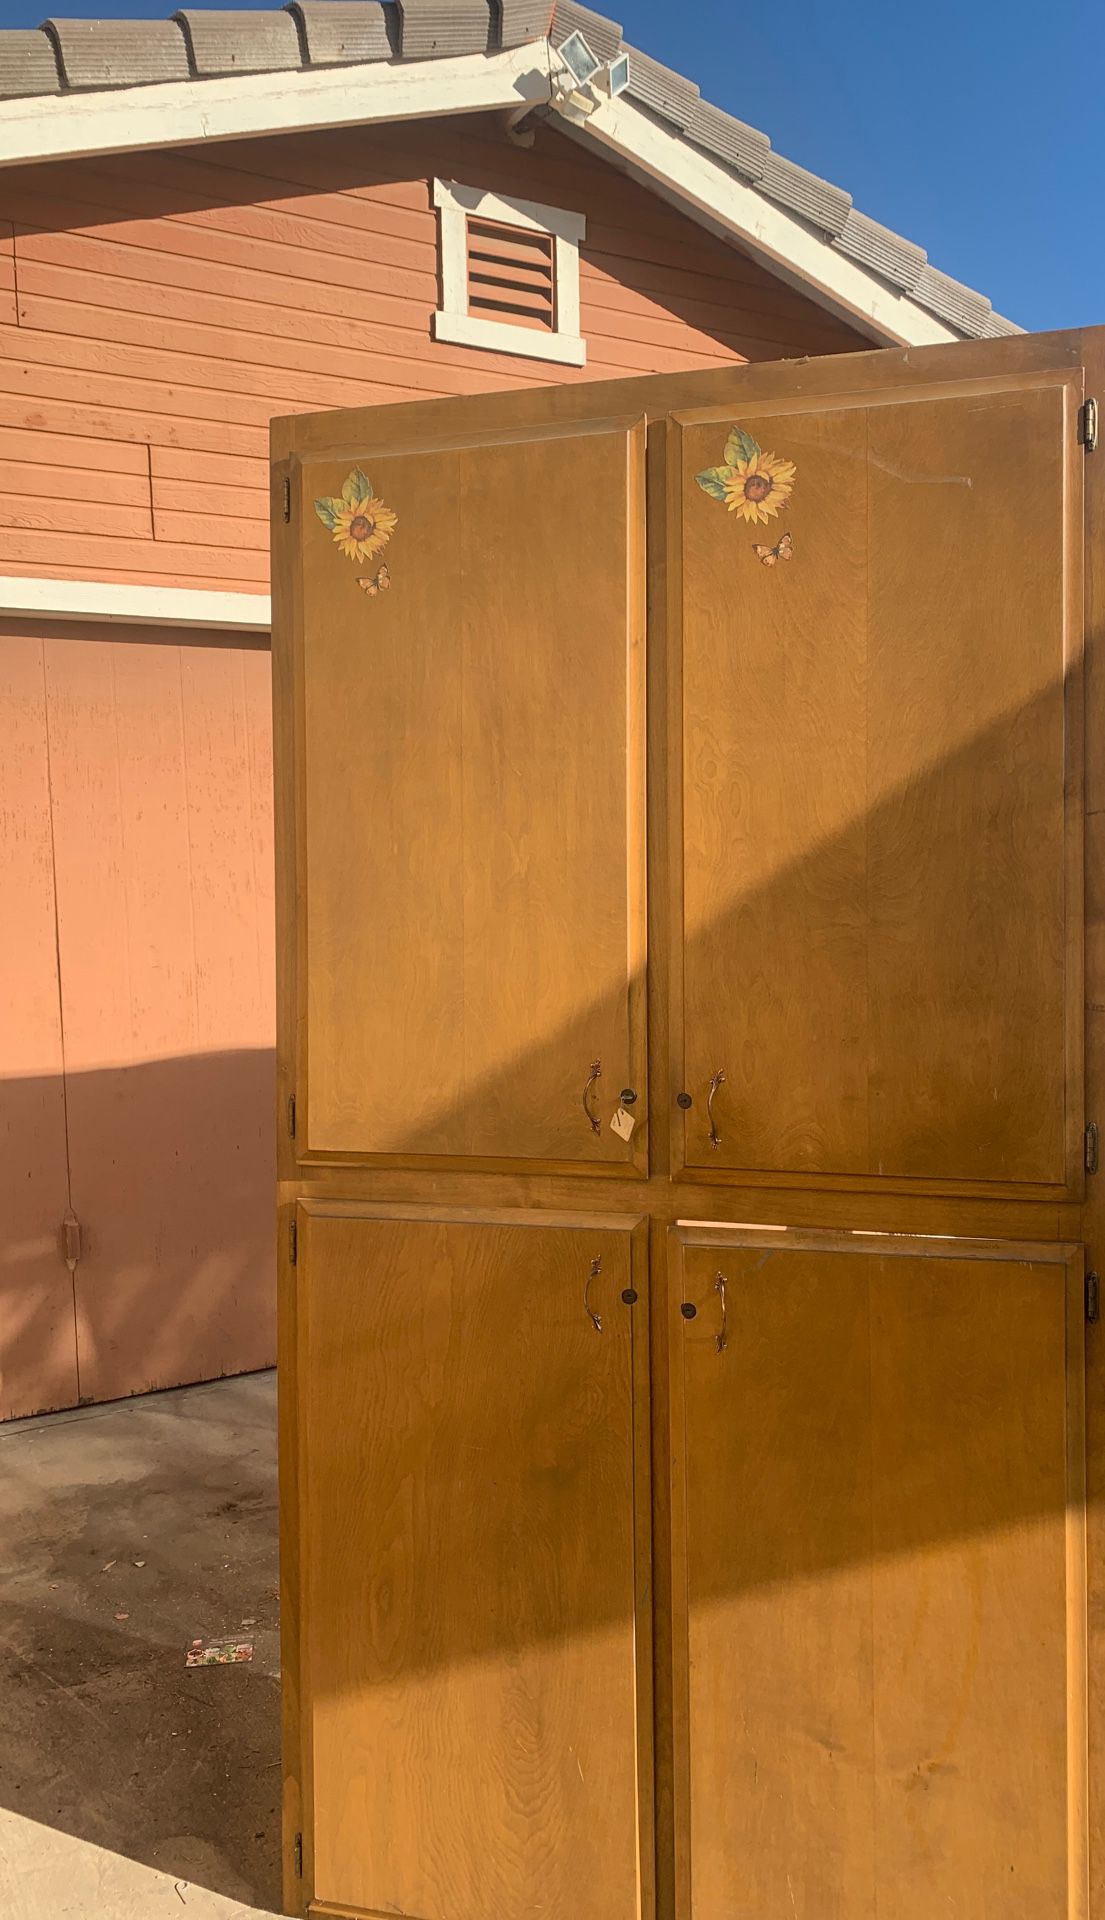 Two free cabinets